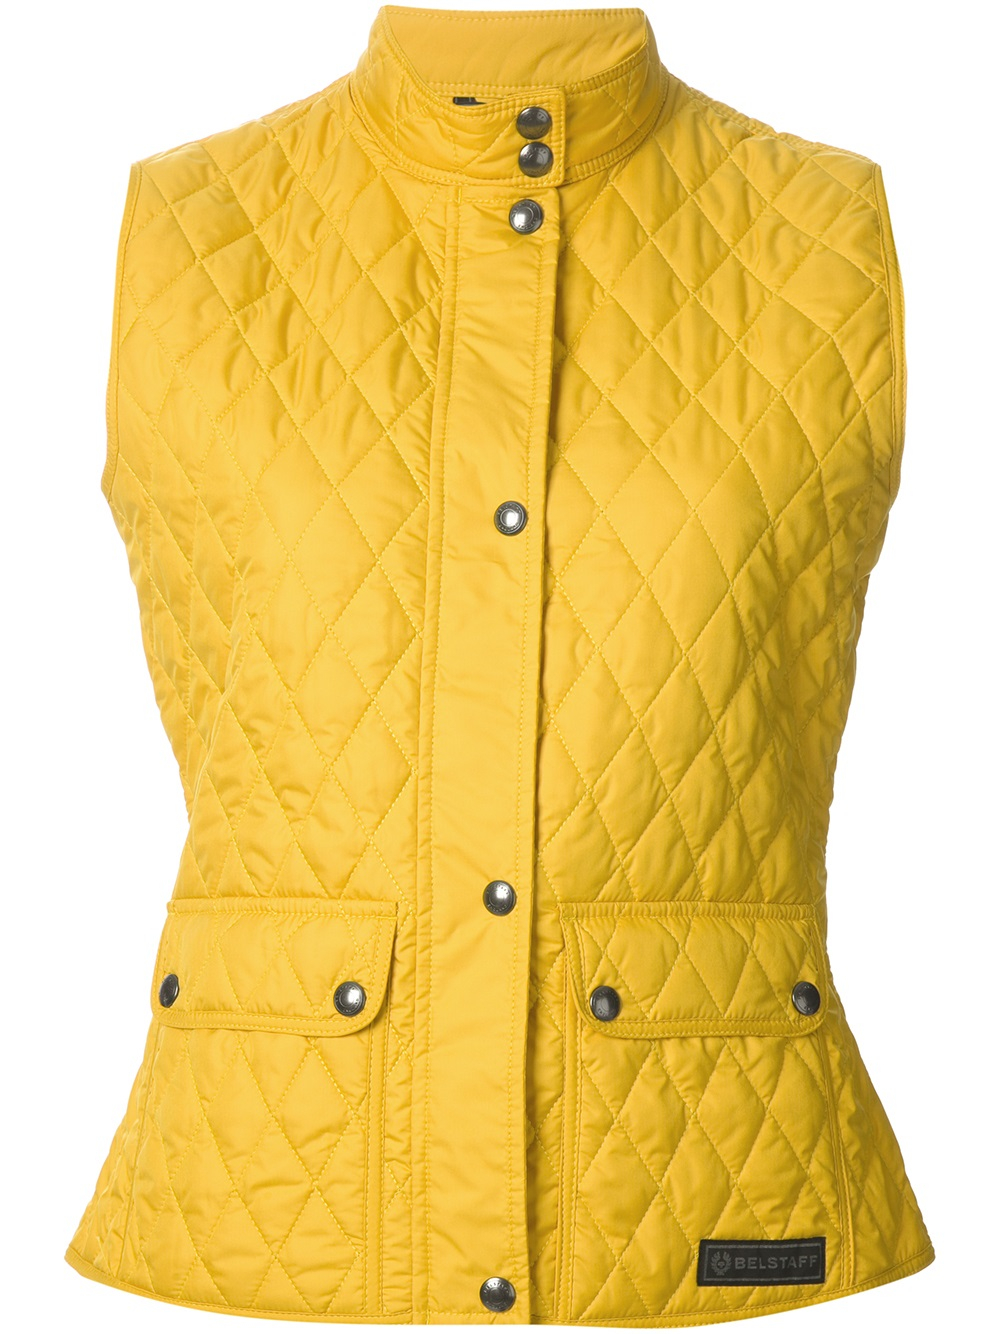 Lyst - Belstaff Quilted Gilet in Yellow